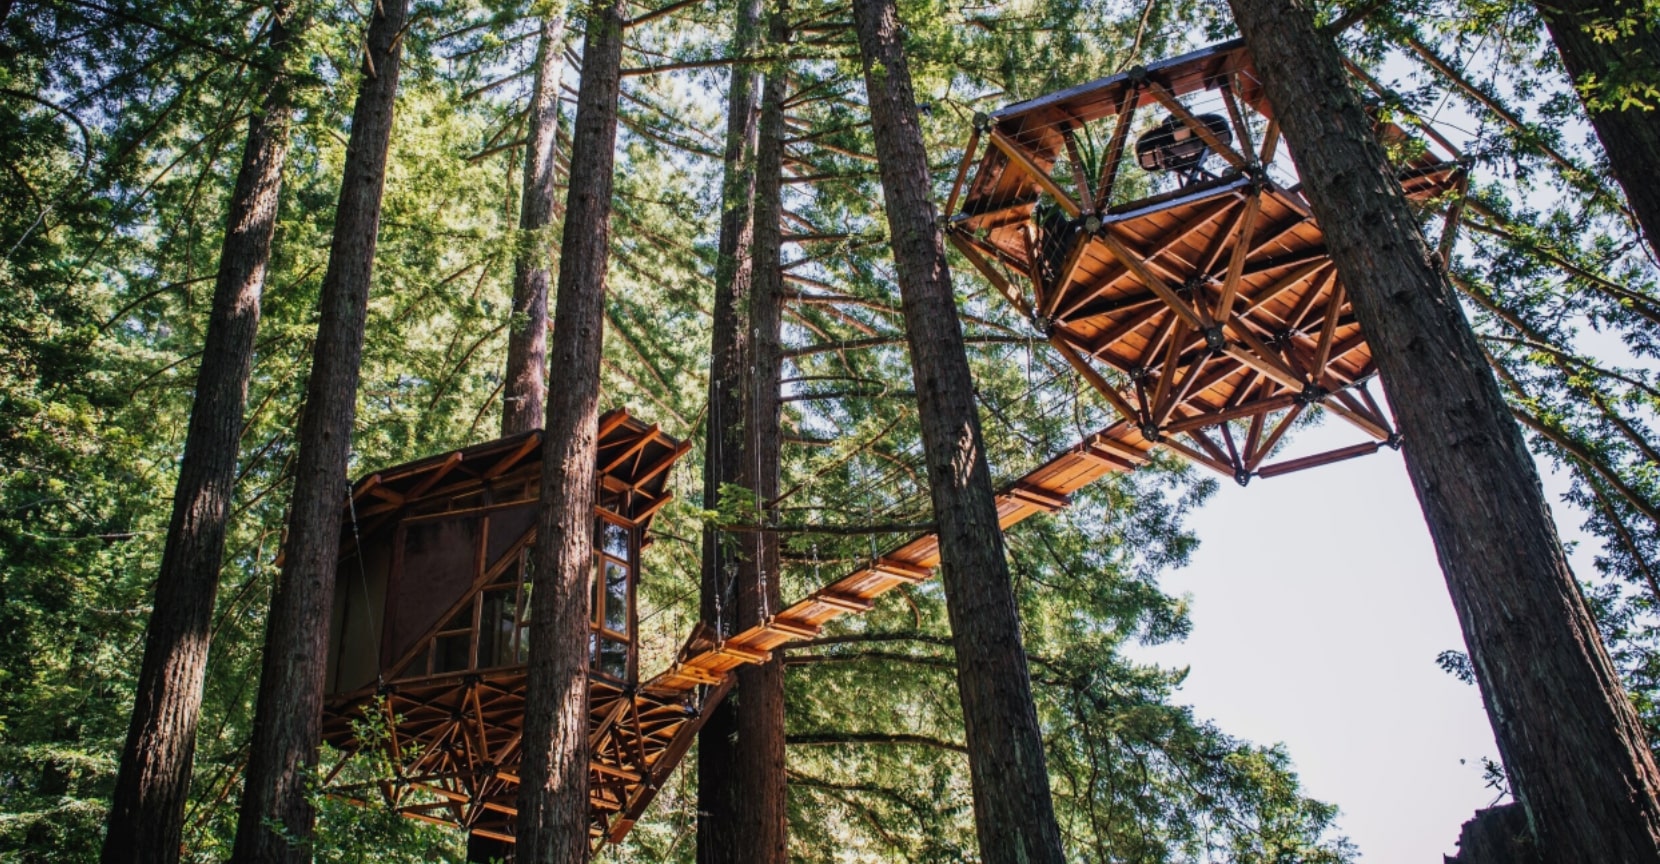 Treewalkers’ story shows glamping’s powerful business potential. What started with a single treehouse structure turned into a $63K/month business.